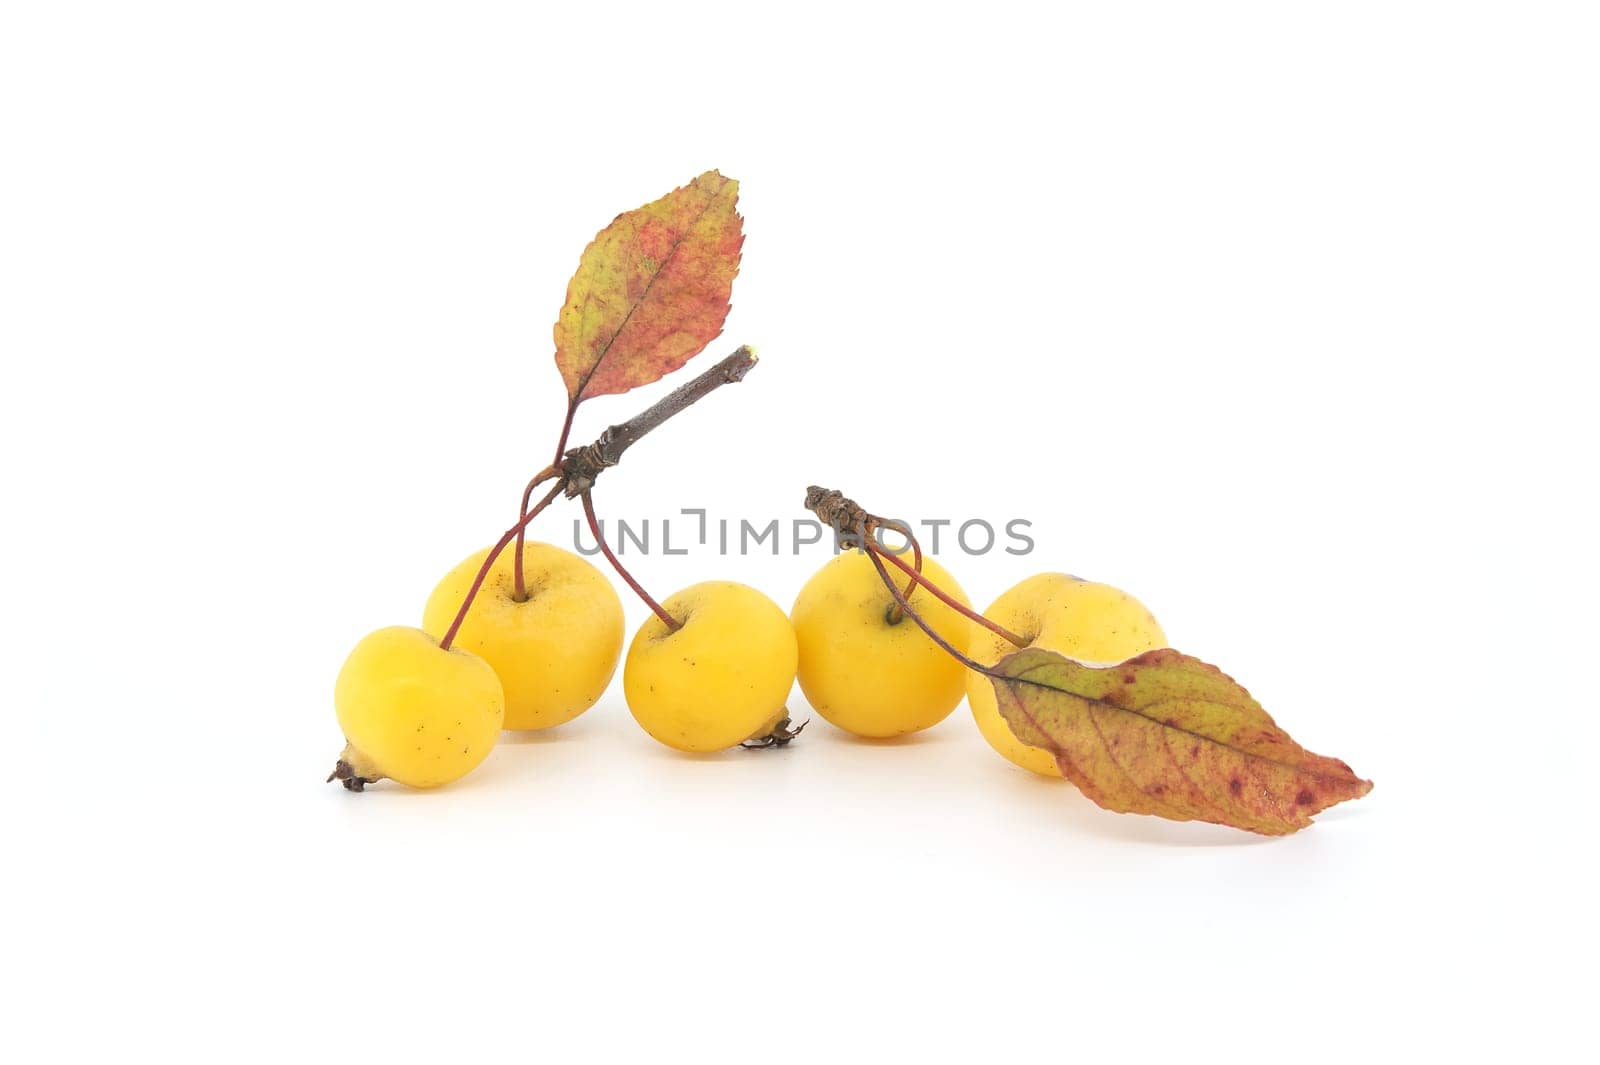 Crab apple or European wild apple isolated on white background. Wild apples are at risk of extinction